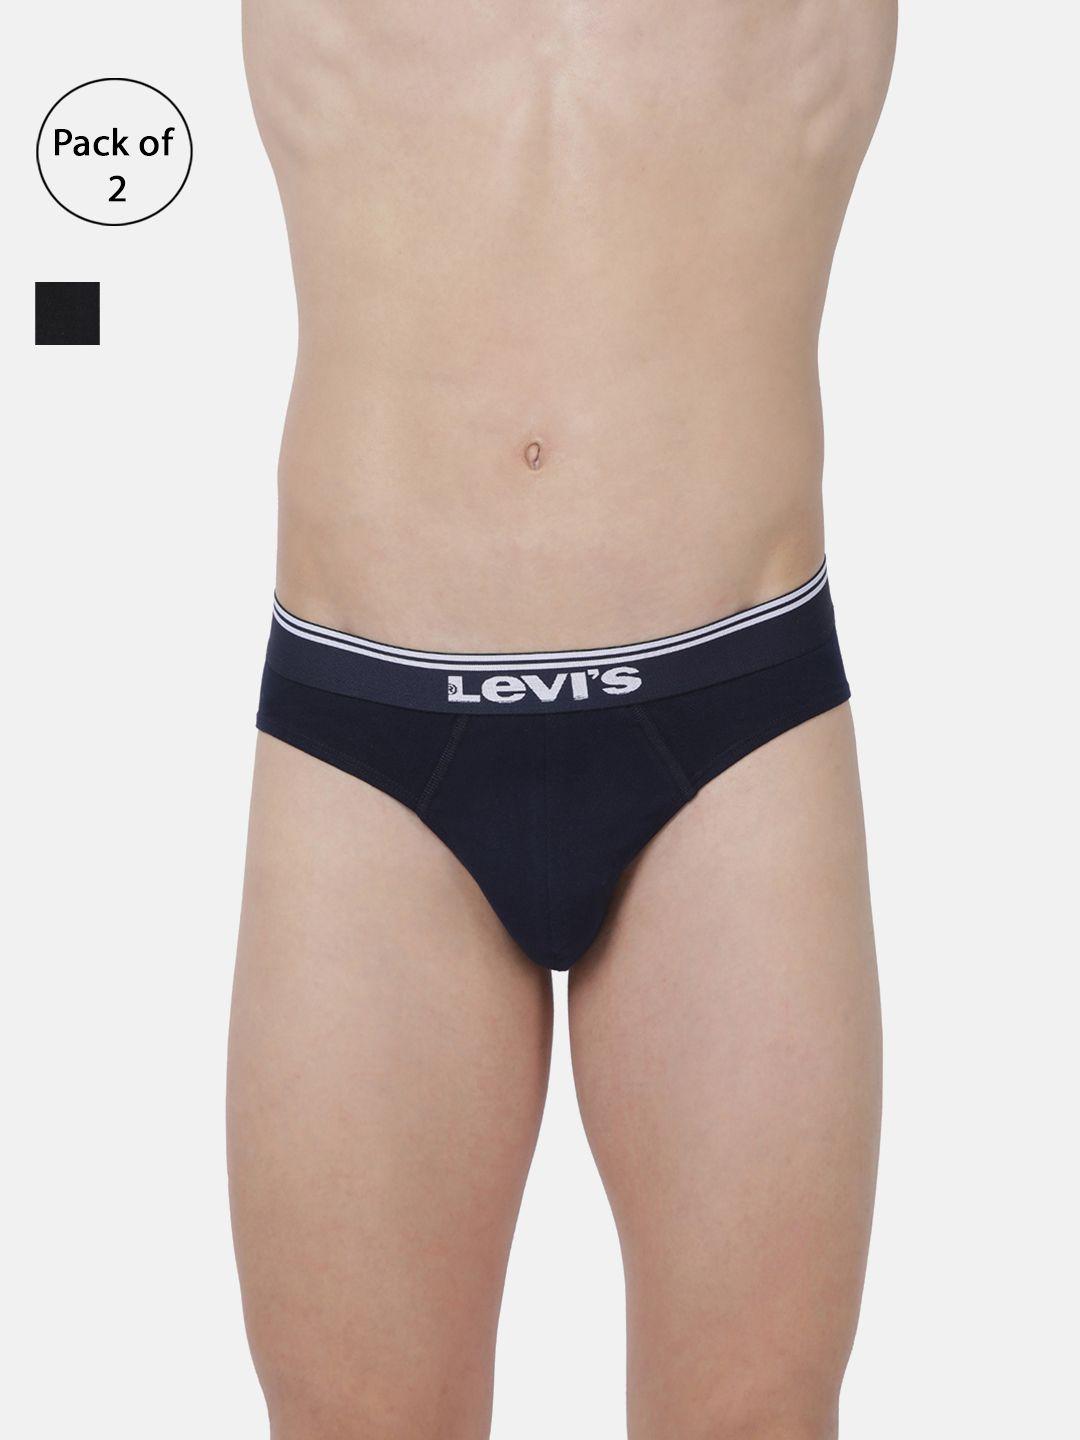 levis men pack of 2 solid briefs bf-200sf-2pk-style-017-439